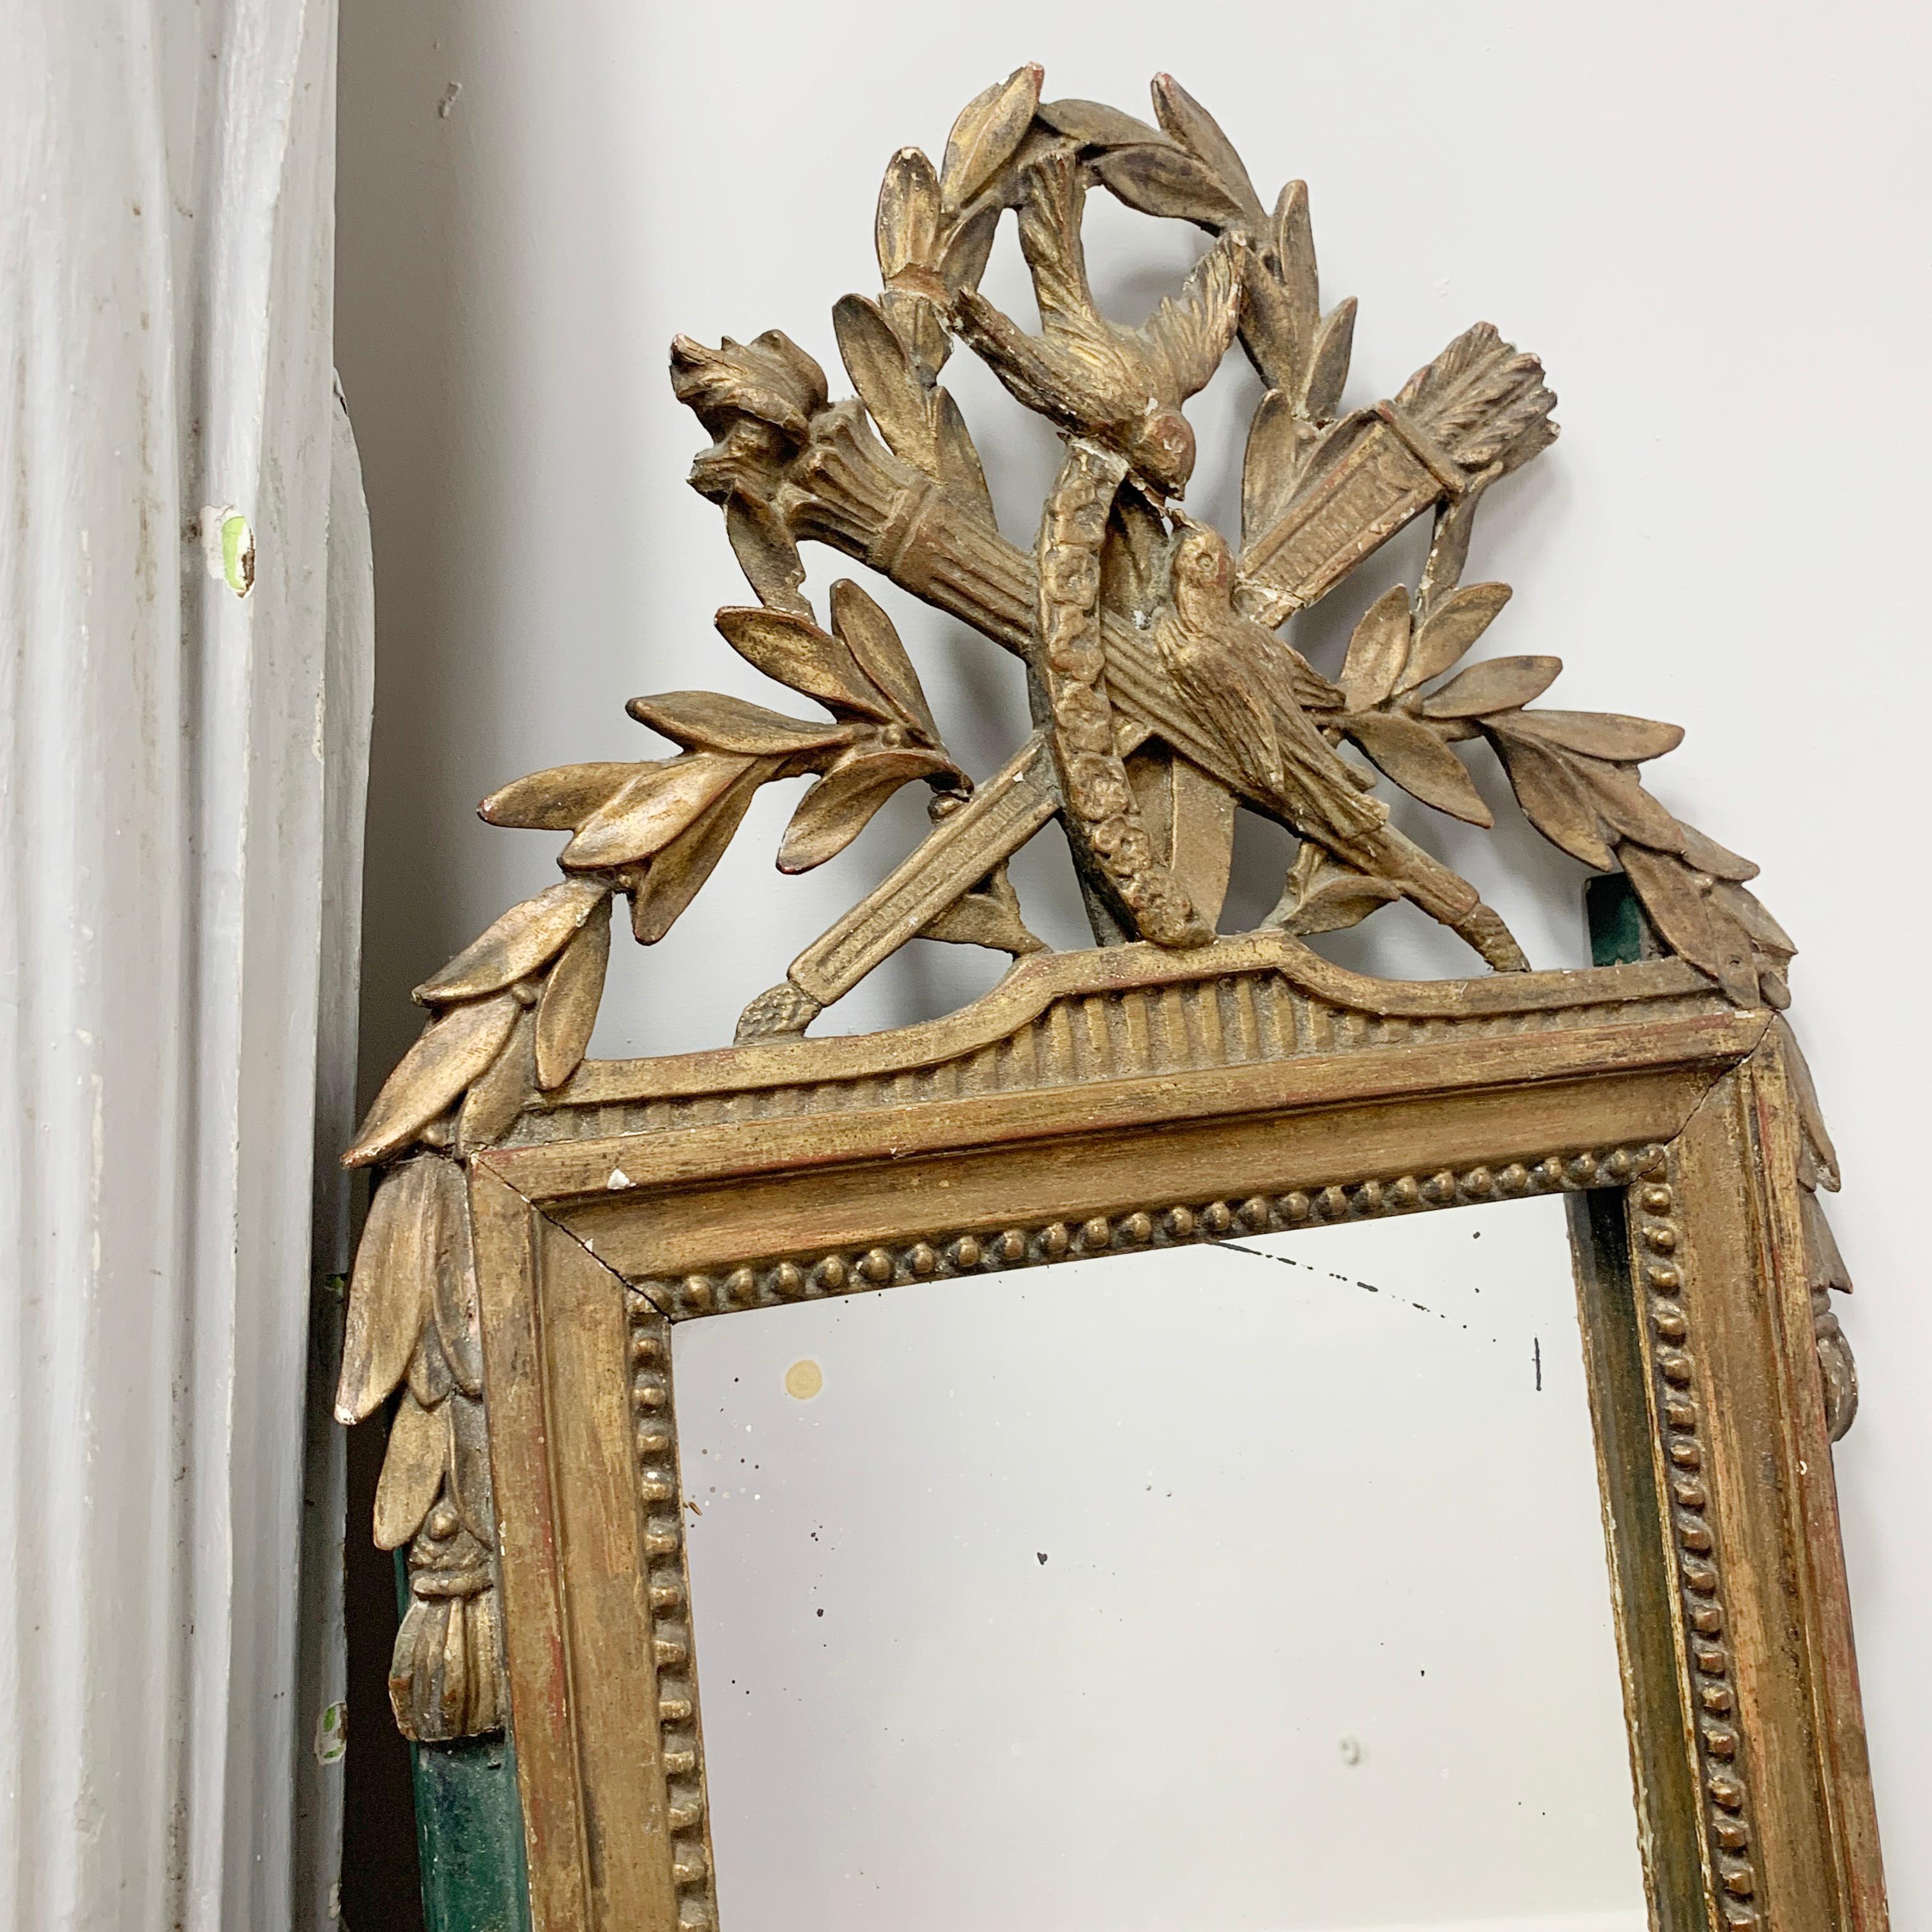 An early 19th century mirror petite, in the Louis XVI style,
Circa 1830
Gilded gesso over carved wood
The frame is gold with bottle green side details, it is adorned with a crest of carved wreath, birds and quiver
Patina and wear commensurate